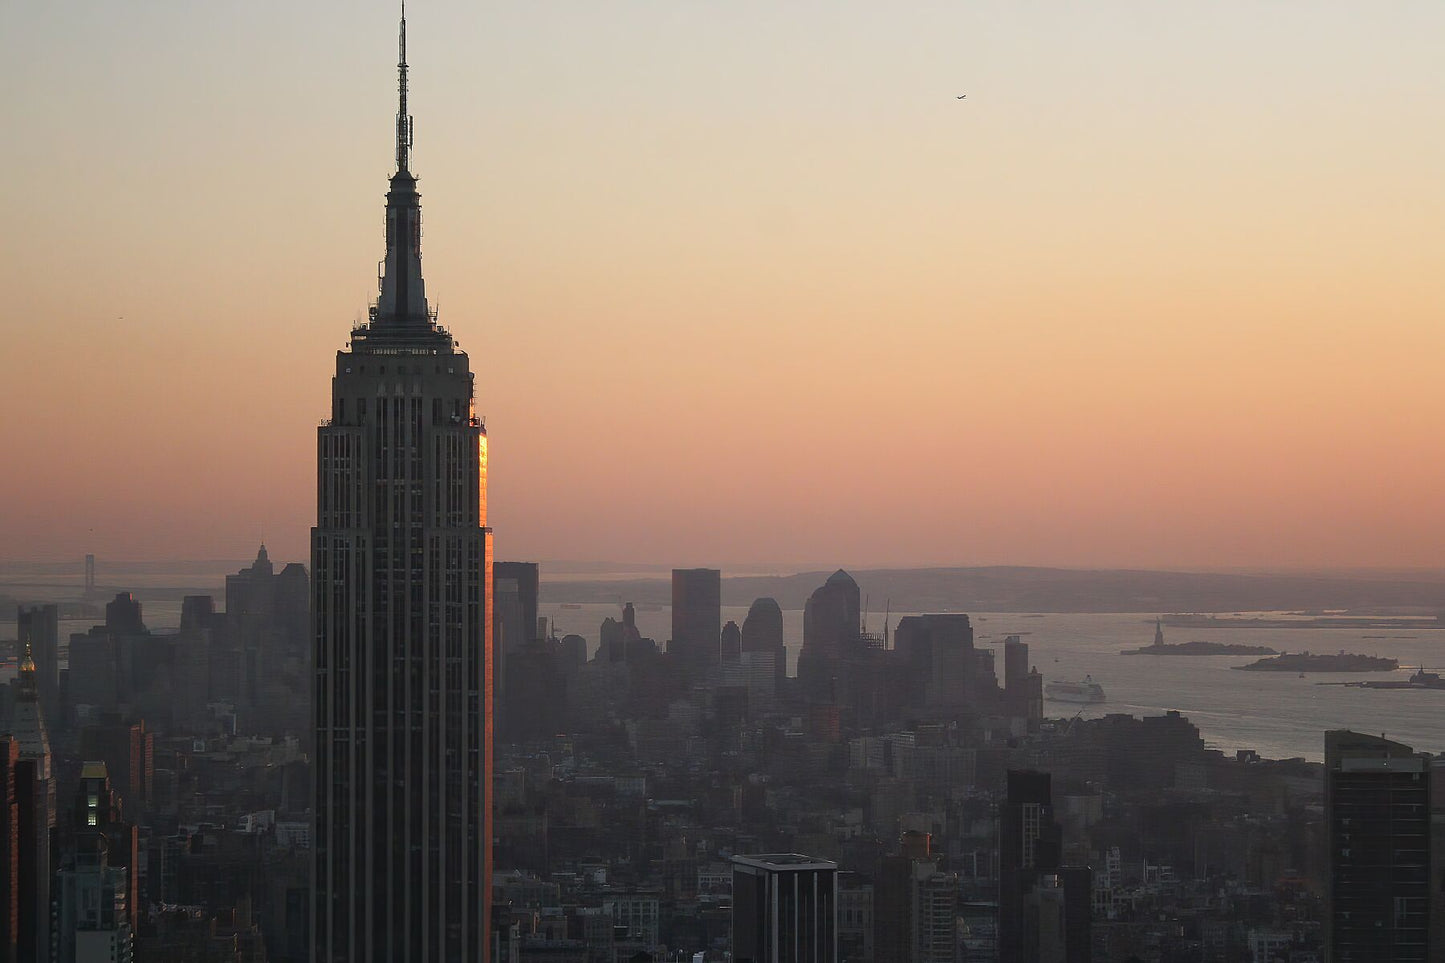 Empire State Building at sunset